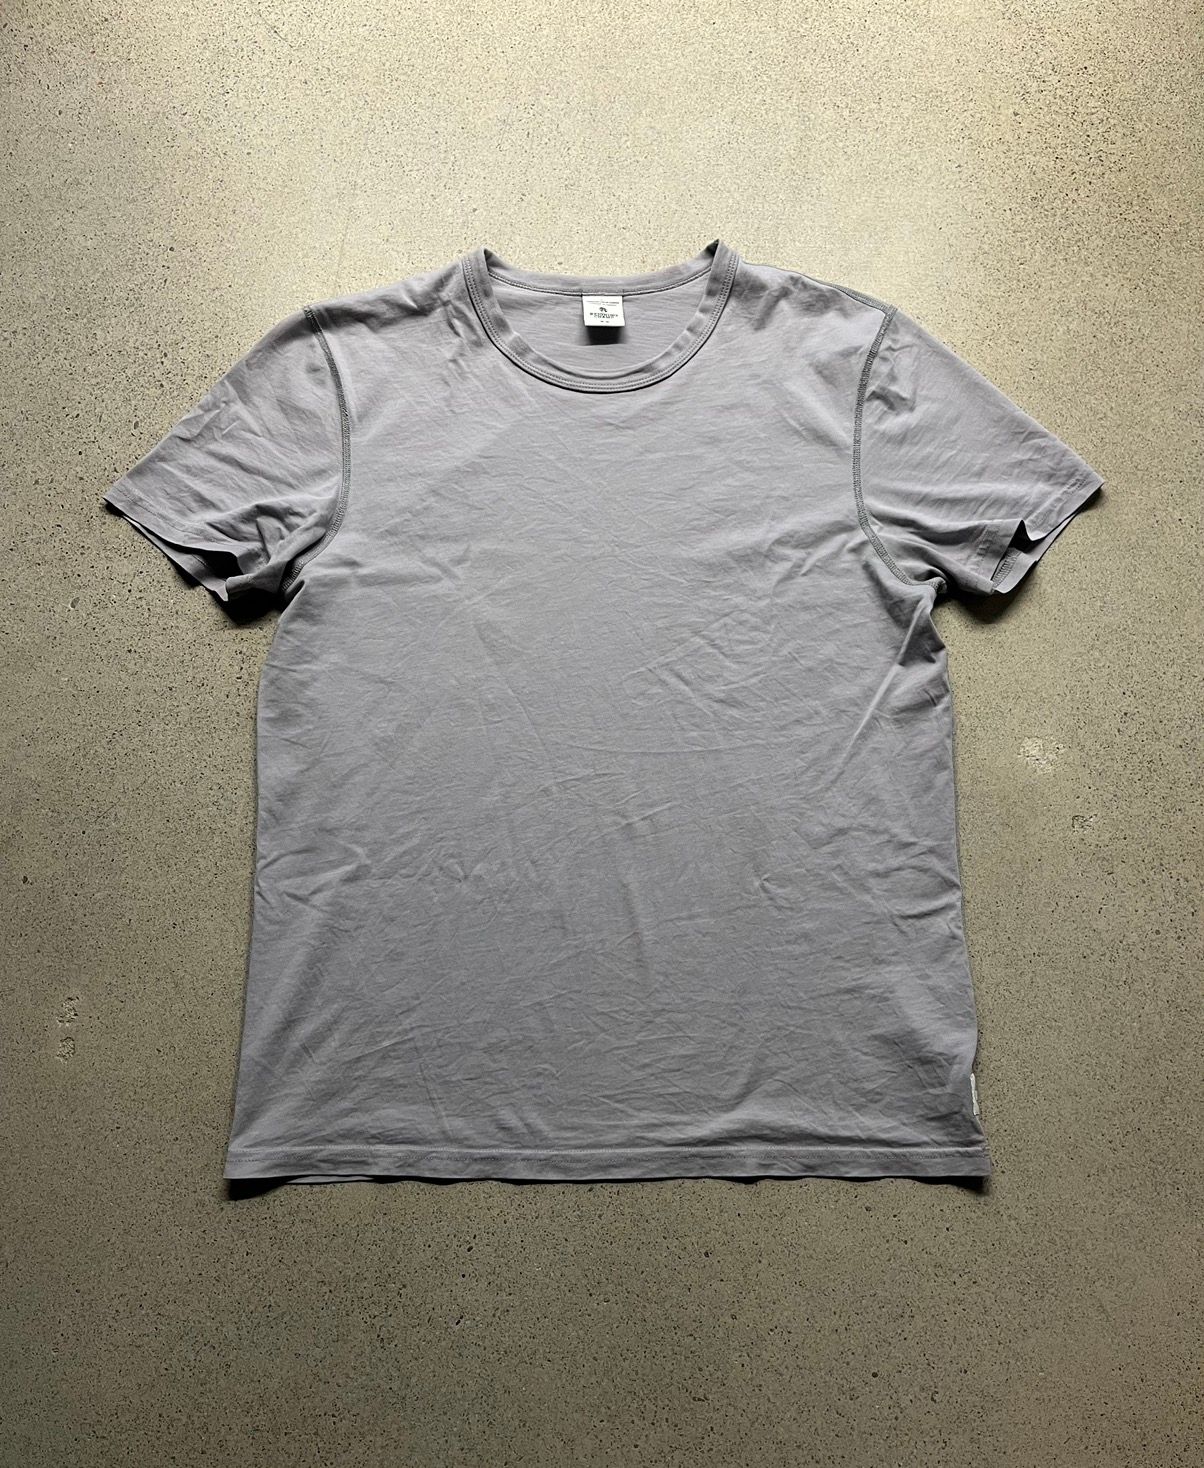 Reigning Champ Reigning Champ Cotton Tee Shirt | Grailed